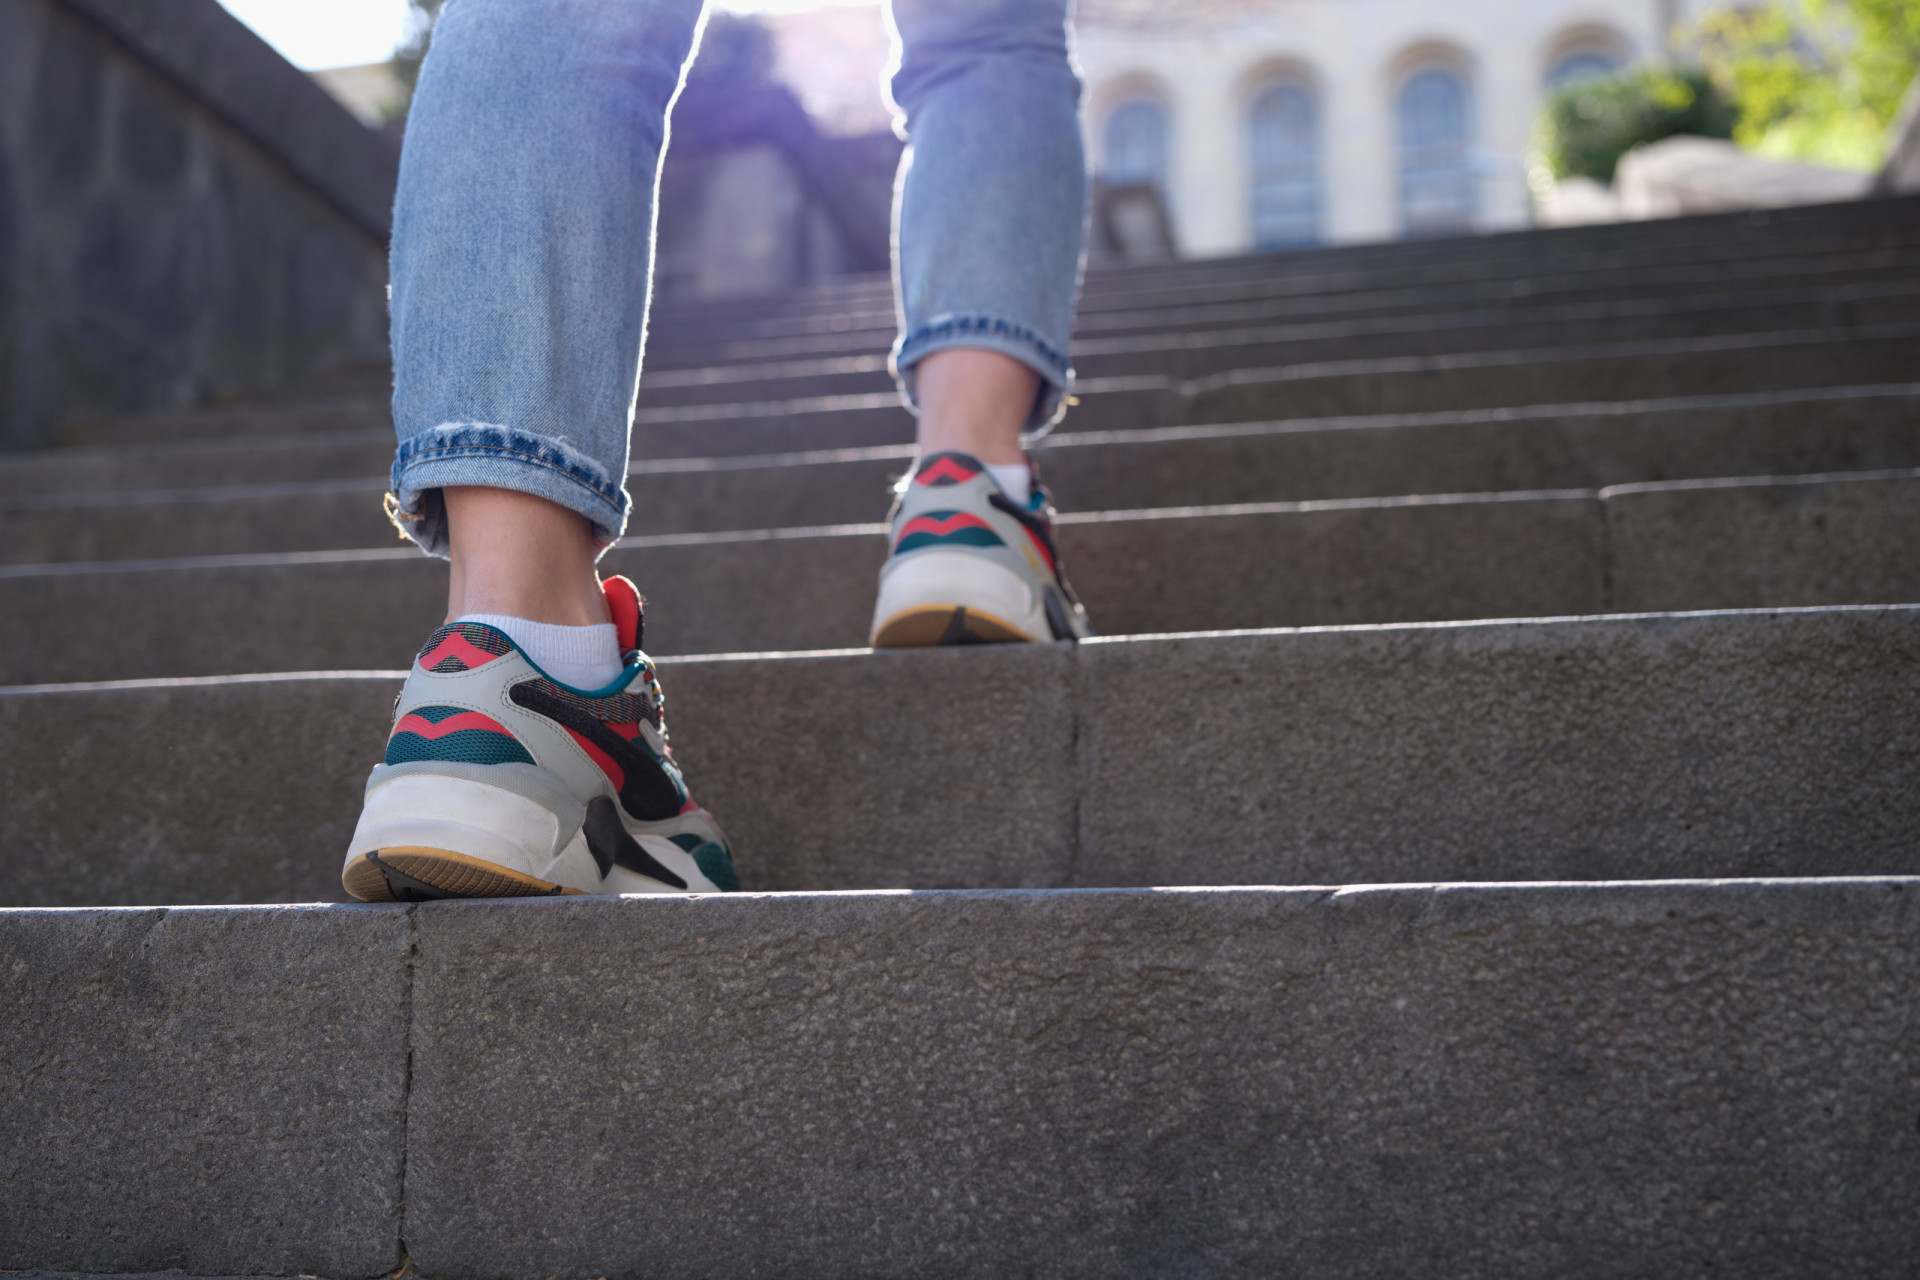 <p>One study examined the effects of climbing four flights of stairs, to see if such a moderate, short activity could produce effects.</p><p>You may also like:<a href="https://www.starsinsider.com/n/299128?utm_source=msn.com&utm_medium=display&utm_campaign=referral_description&utm_content=682837en-in"> Controversy! Movies that are better than their books </a></p>